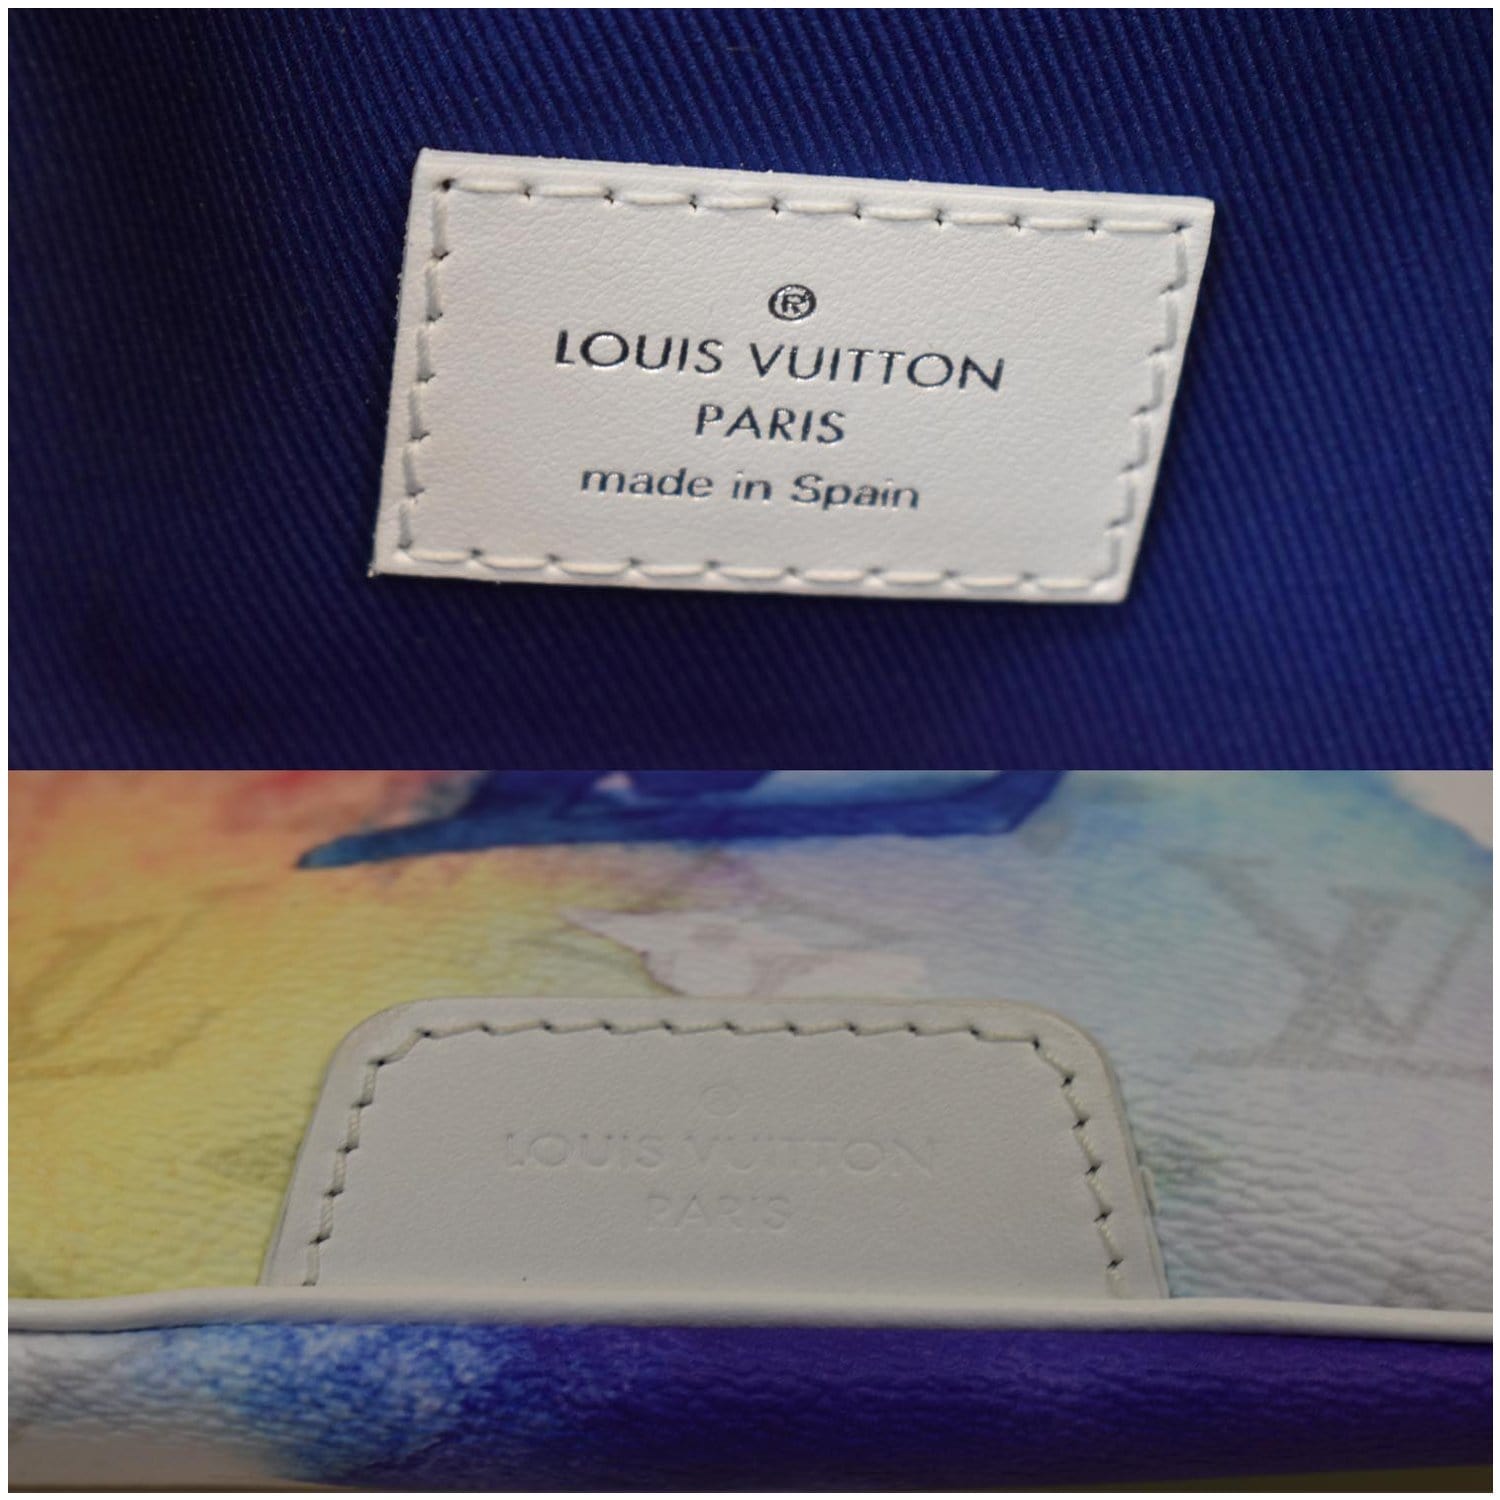 Louis Vuitton Monogram Watercolor Discovery Backpack PM - Blue